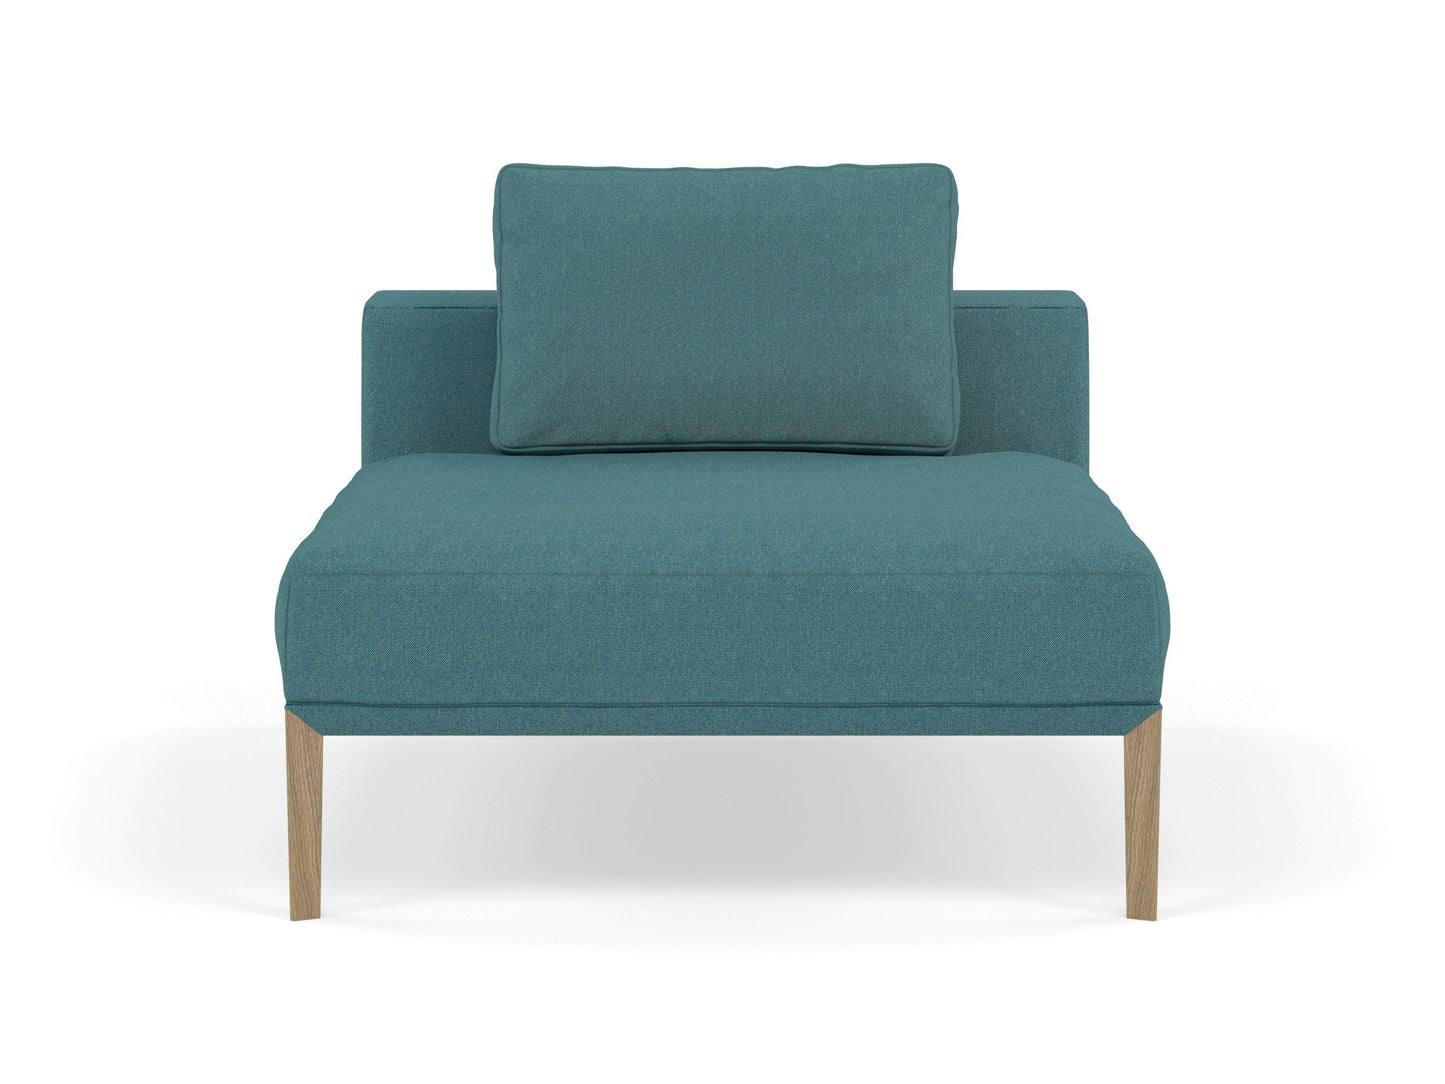 Modern Armchair 1 Seater Sofa without armrests in Teal Blue Fabric-Natural Oak-Distinct Designs (London) Ltd